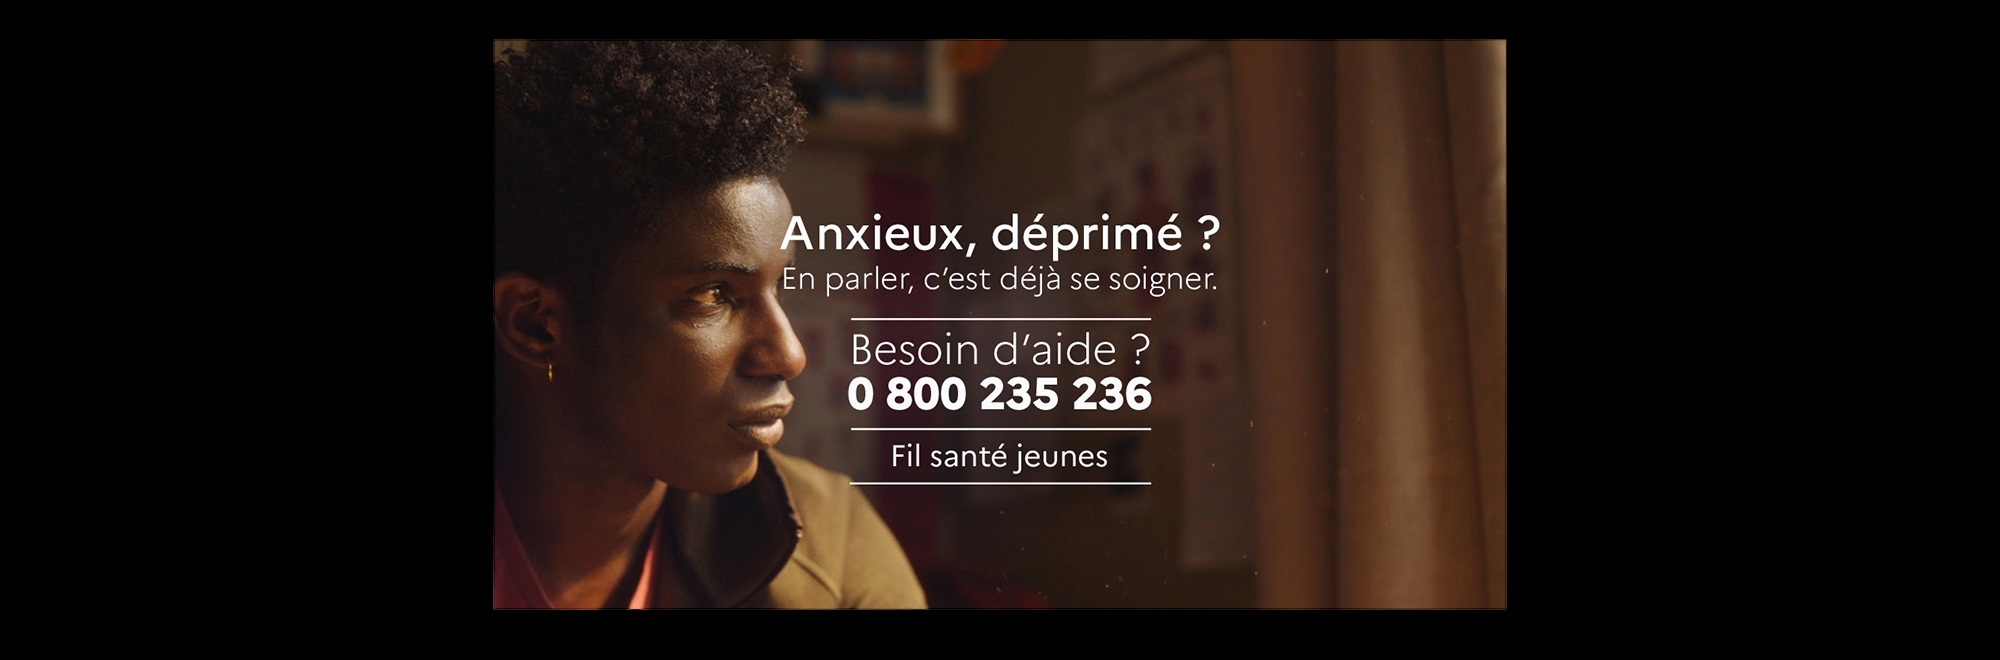 French Ministry of Health prioritises mental health in compassionate film by Vincent Rodella